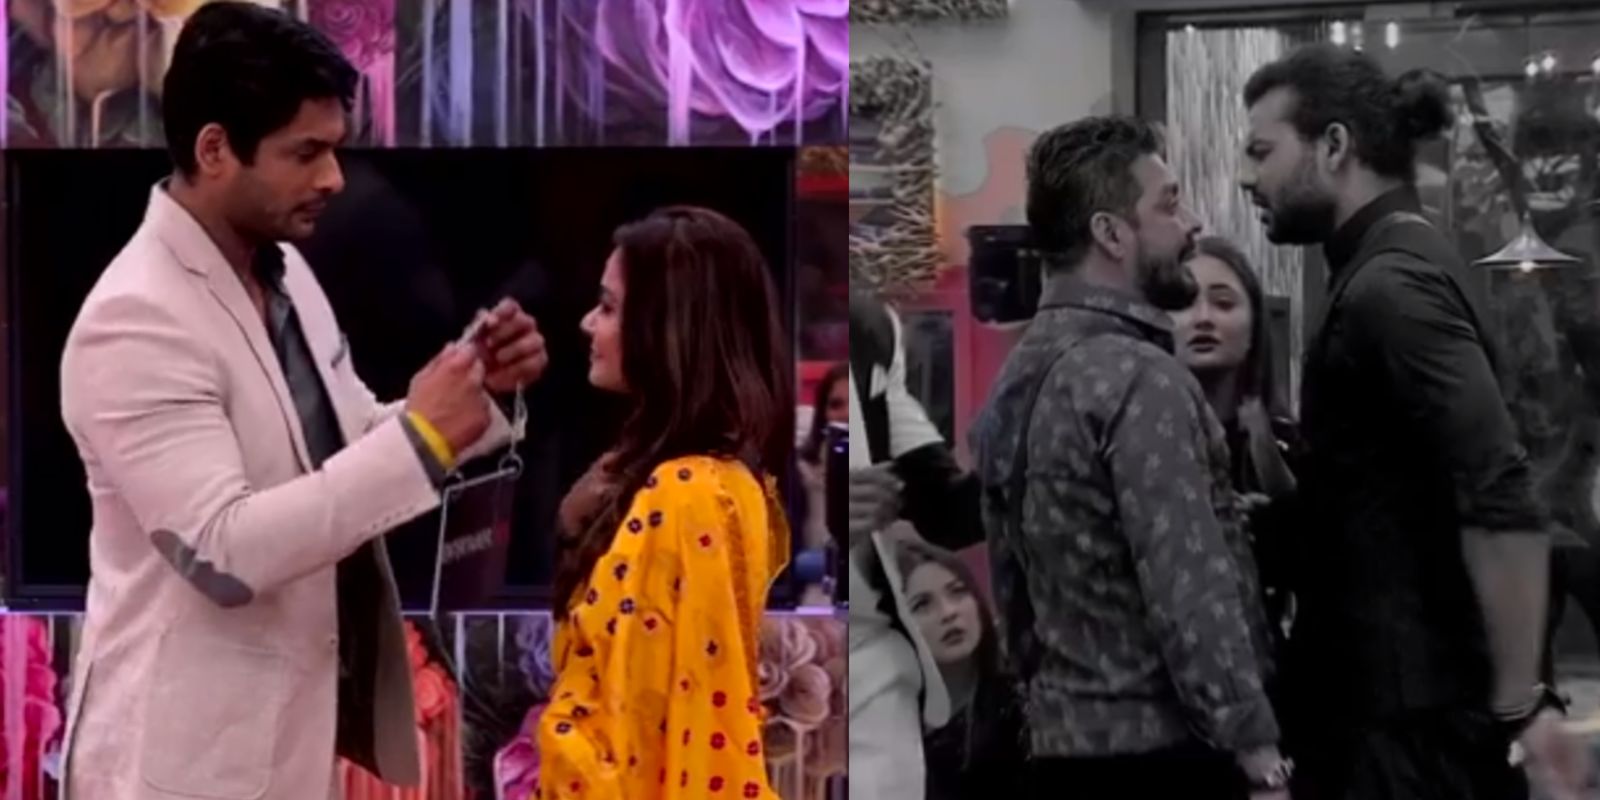 Bigg Boss 13 Preview: After Devoleena, Mahira Also Says That She Likes Sidharth, Vishal And Hindustani Bhau Fight It Out!